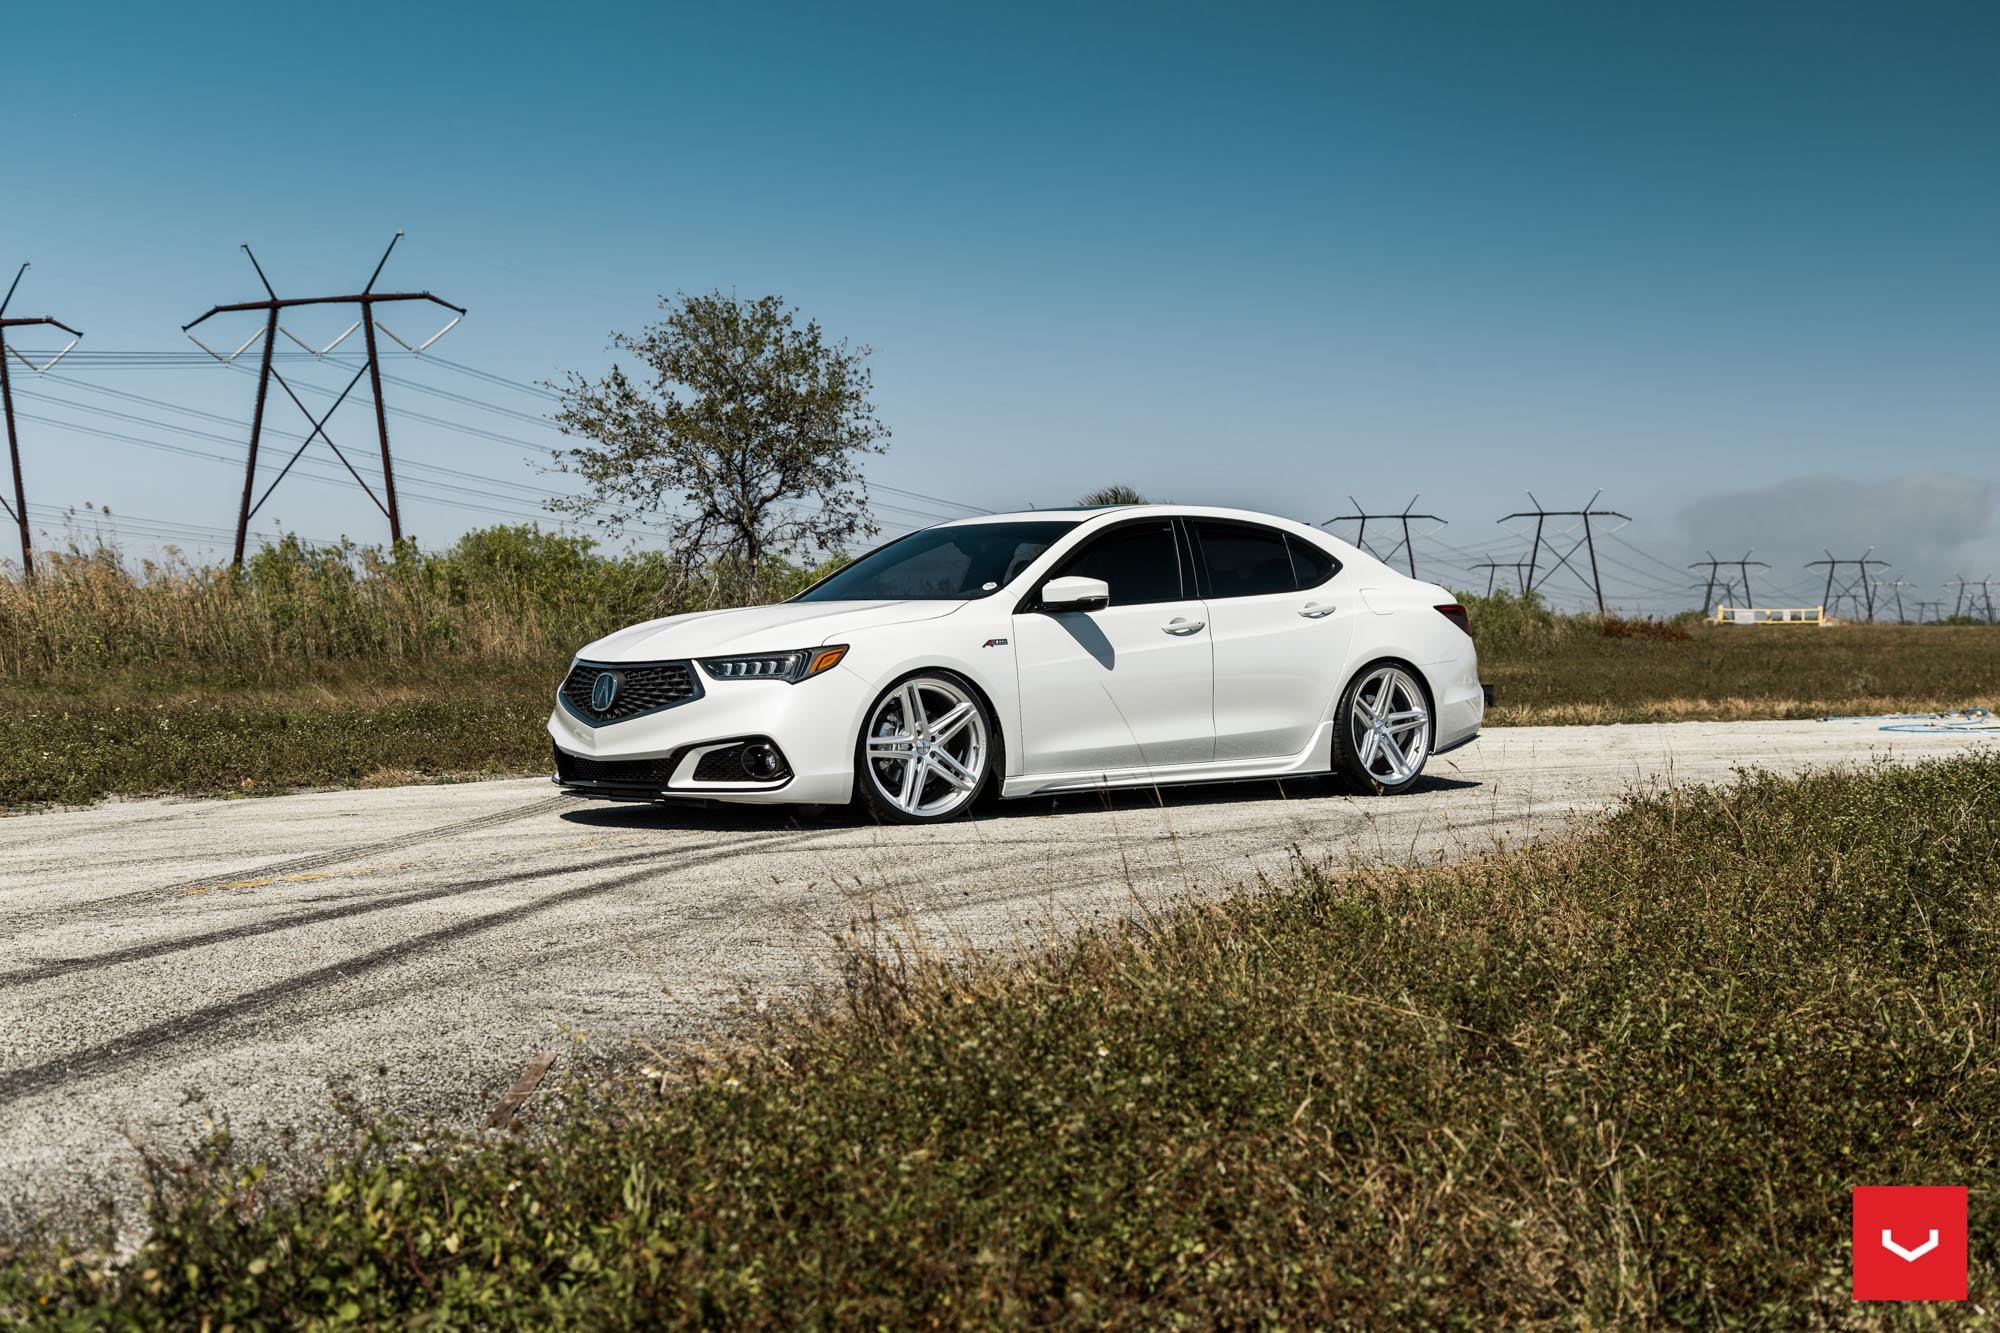 Front Bumper with Fog Lights on White Acura TLX - Photo by Vossen